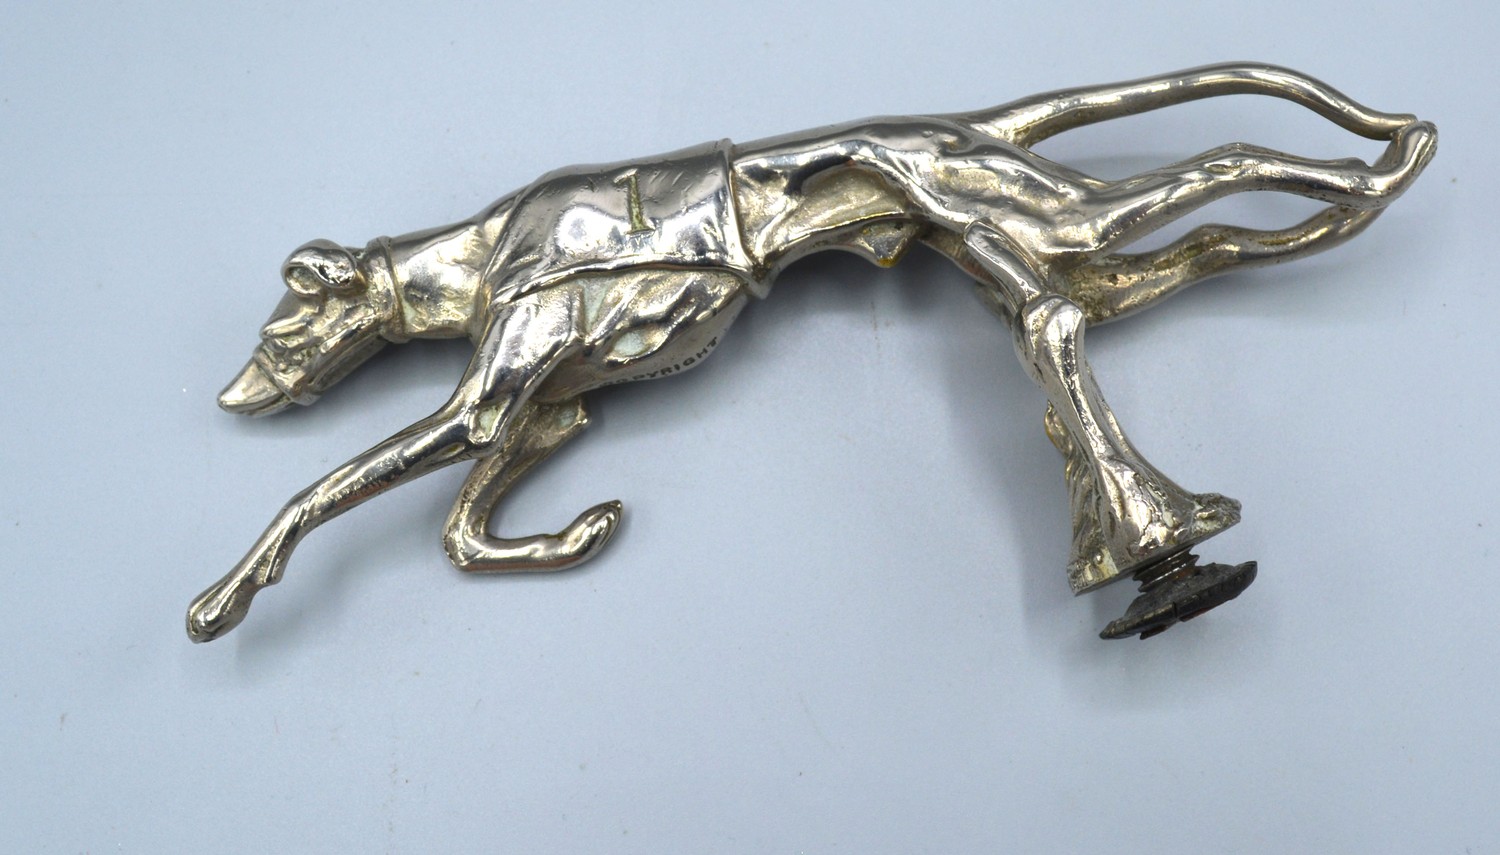 A Desmo Silver Plated Car Mascot in the form of a Greyhound Number 1 15 cms long